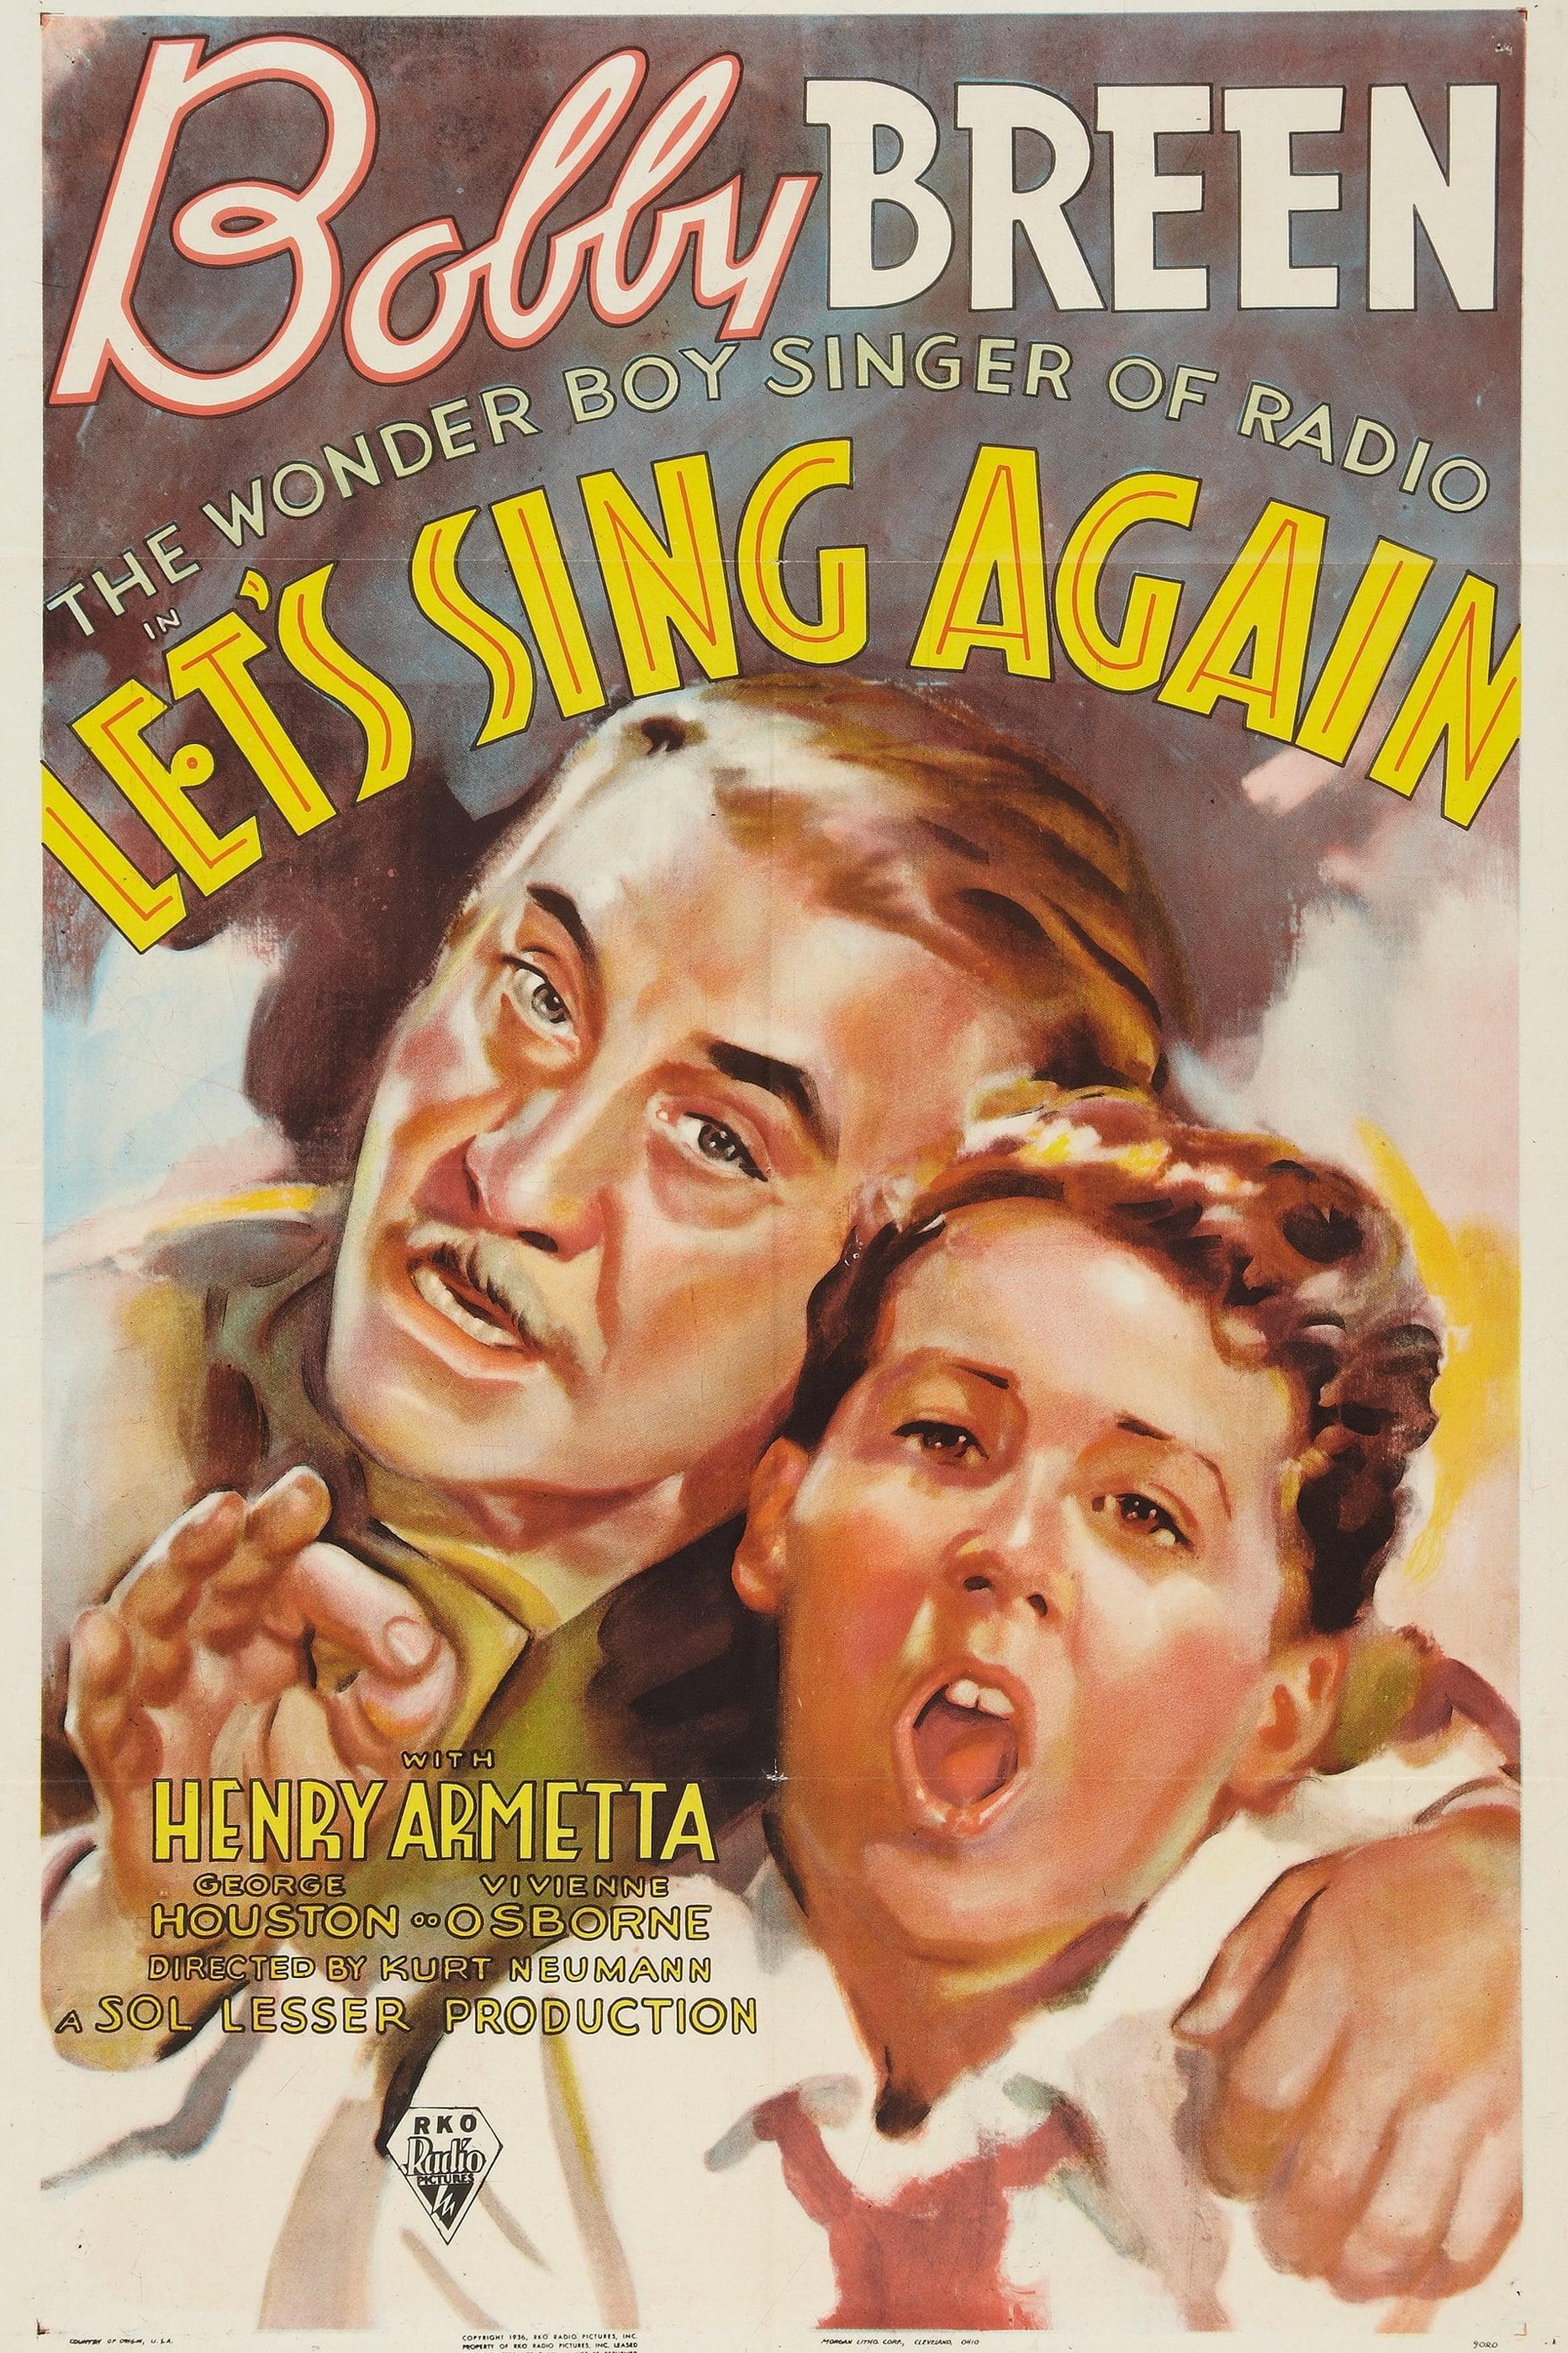 Let's Sing Again poster